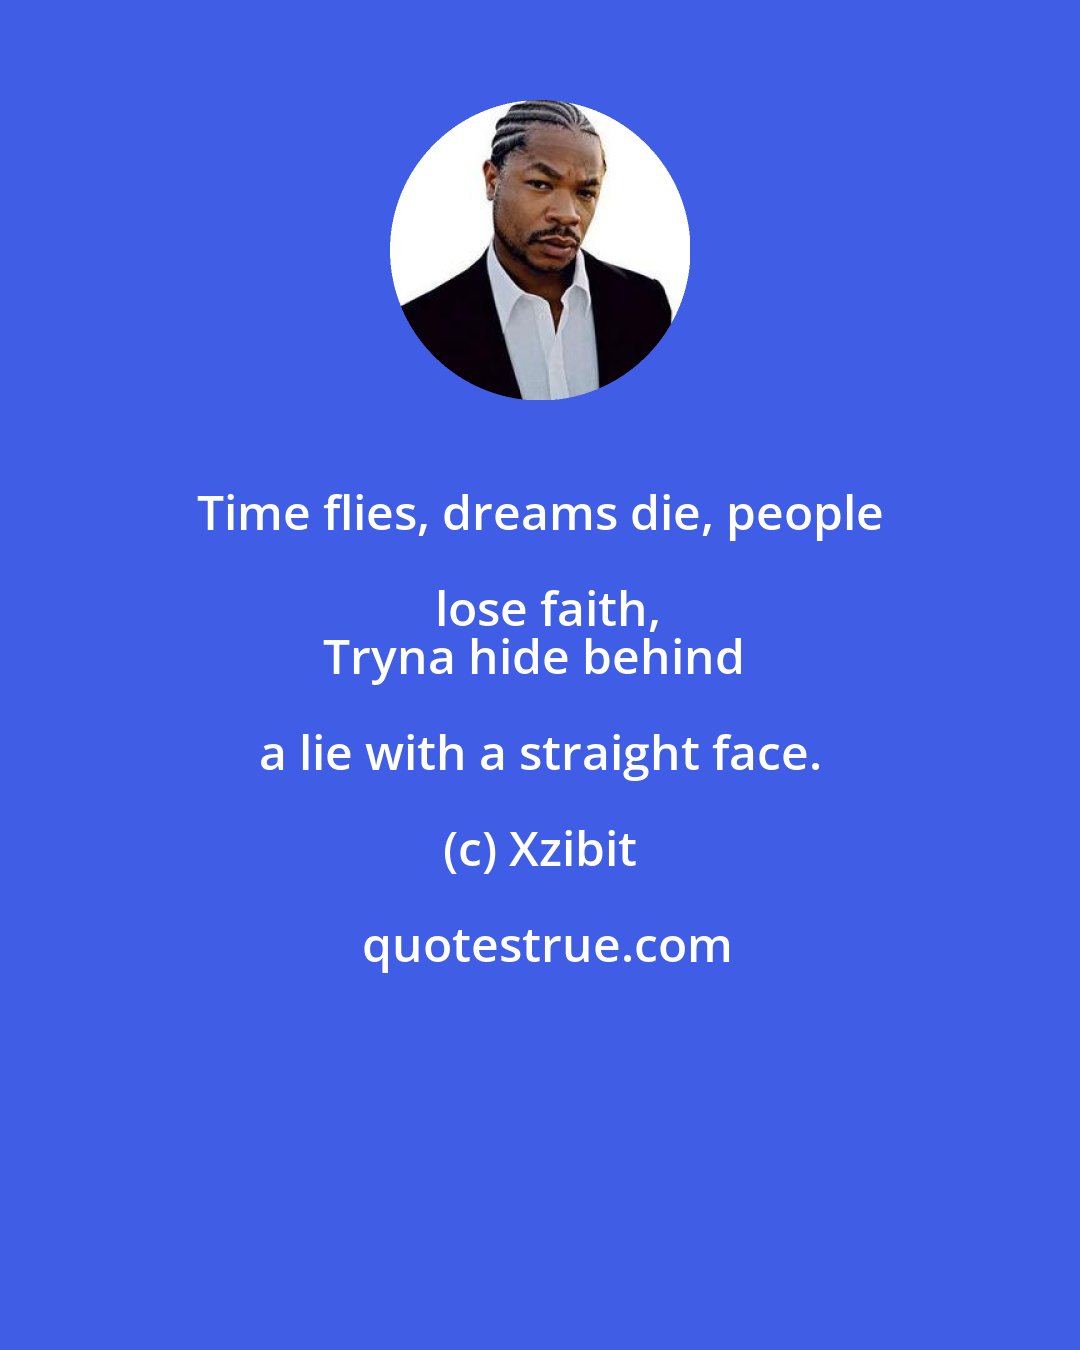 Xzibit: Time flies, dreams die, people lose faith,
Tryna hide behind a lie with a straight face.